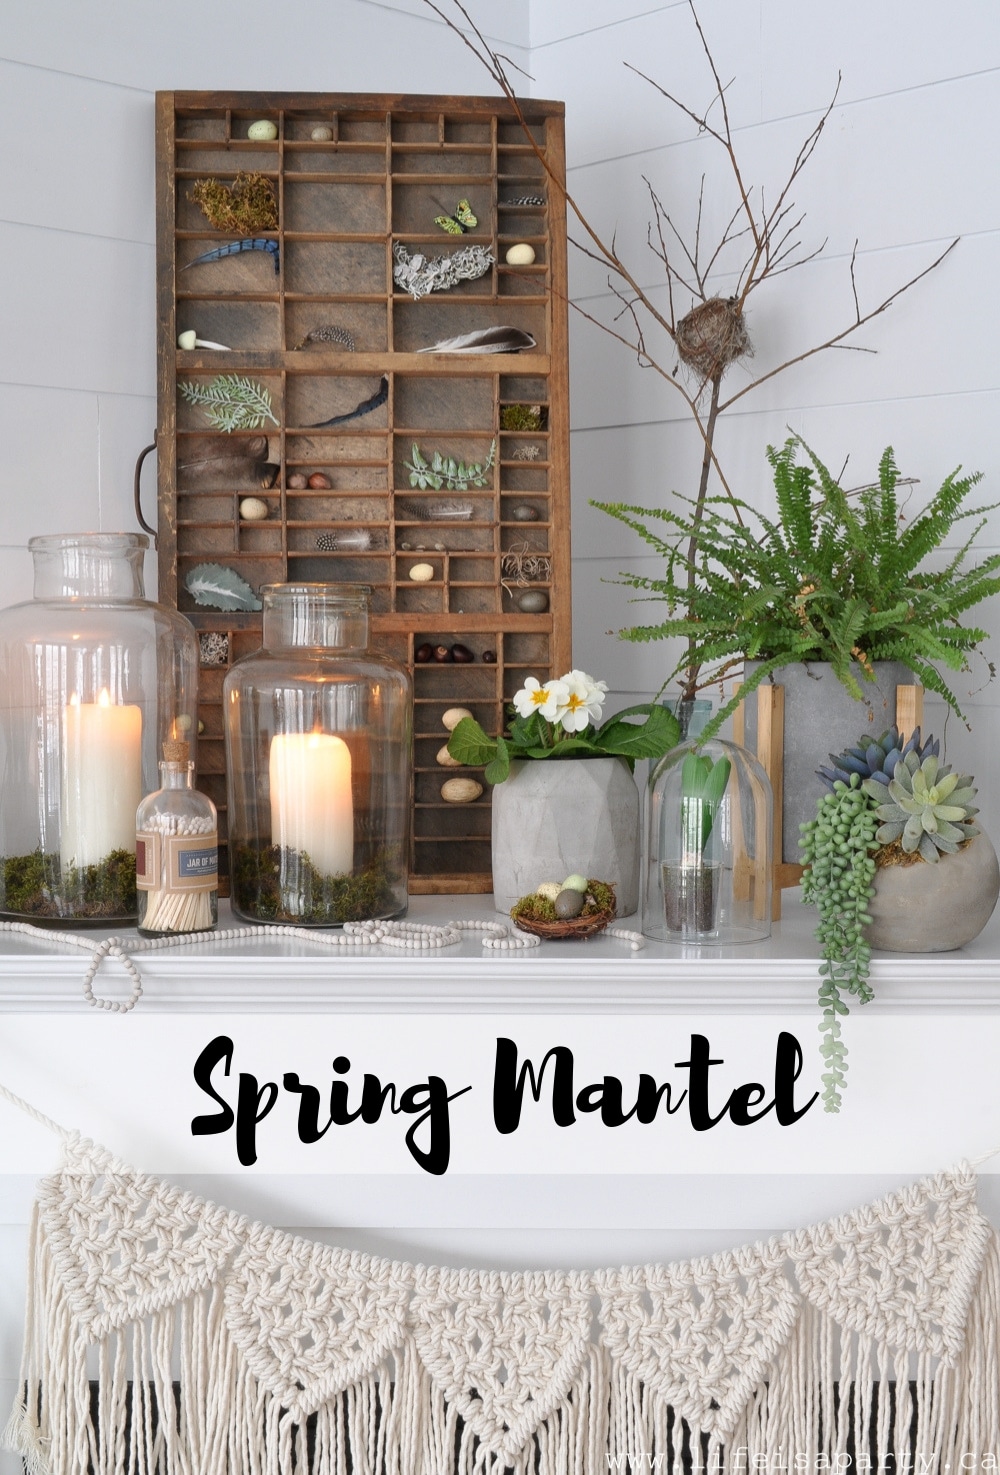 Spring Mantel: How to use layers, repeated colours and materials, and different heights to create a beautiful boho spring mantel with lots of plants.